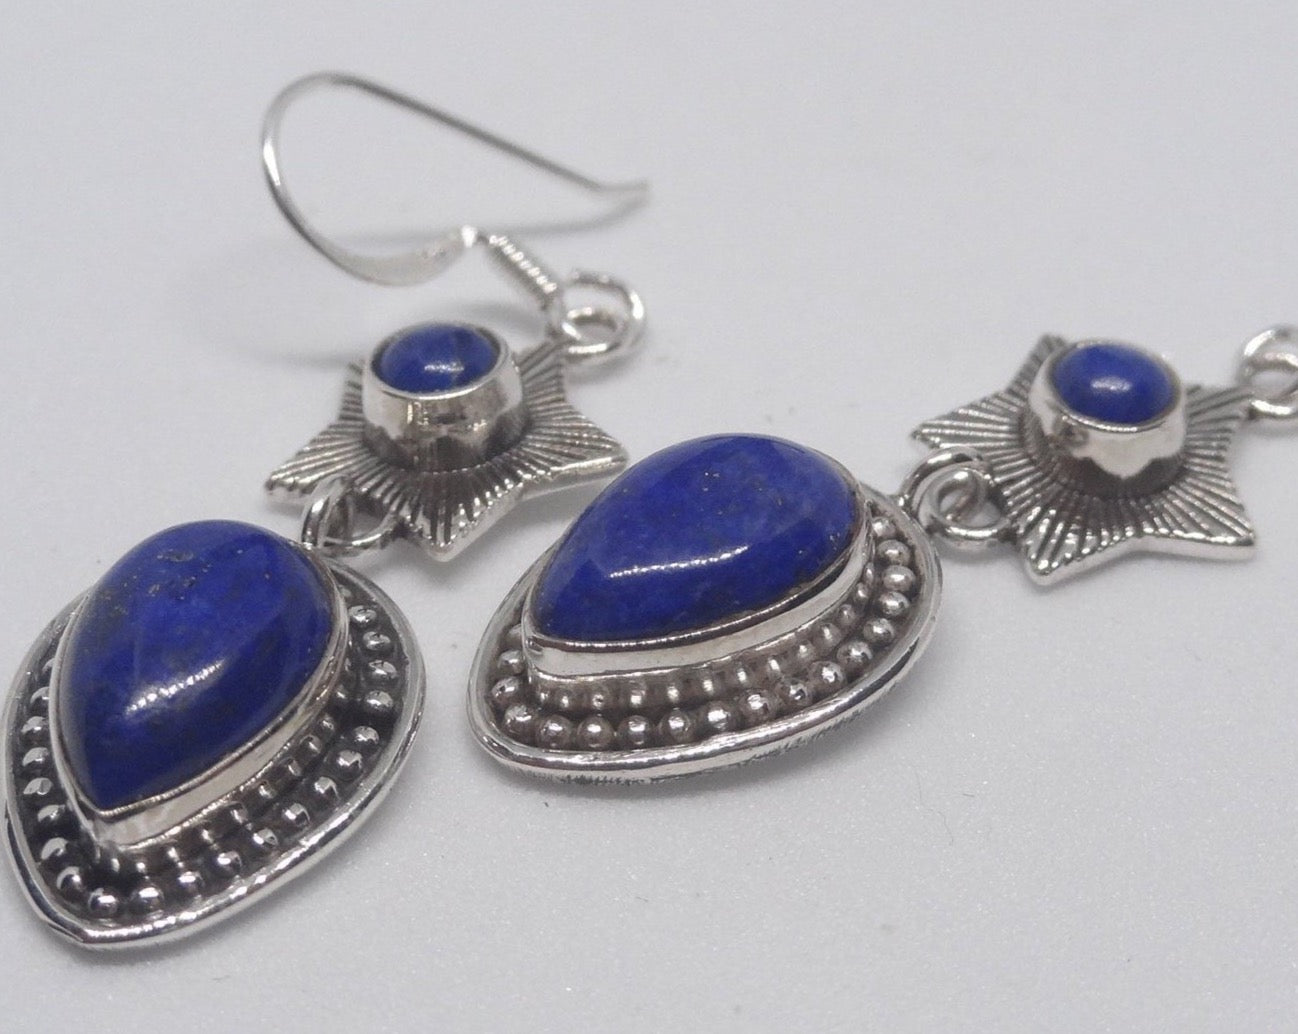 Gorgeous Star and Droplet Lapis Lazuli Silver Earrings